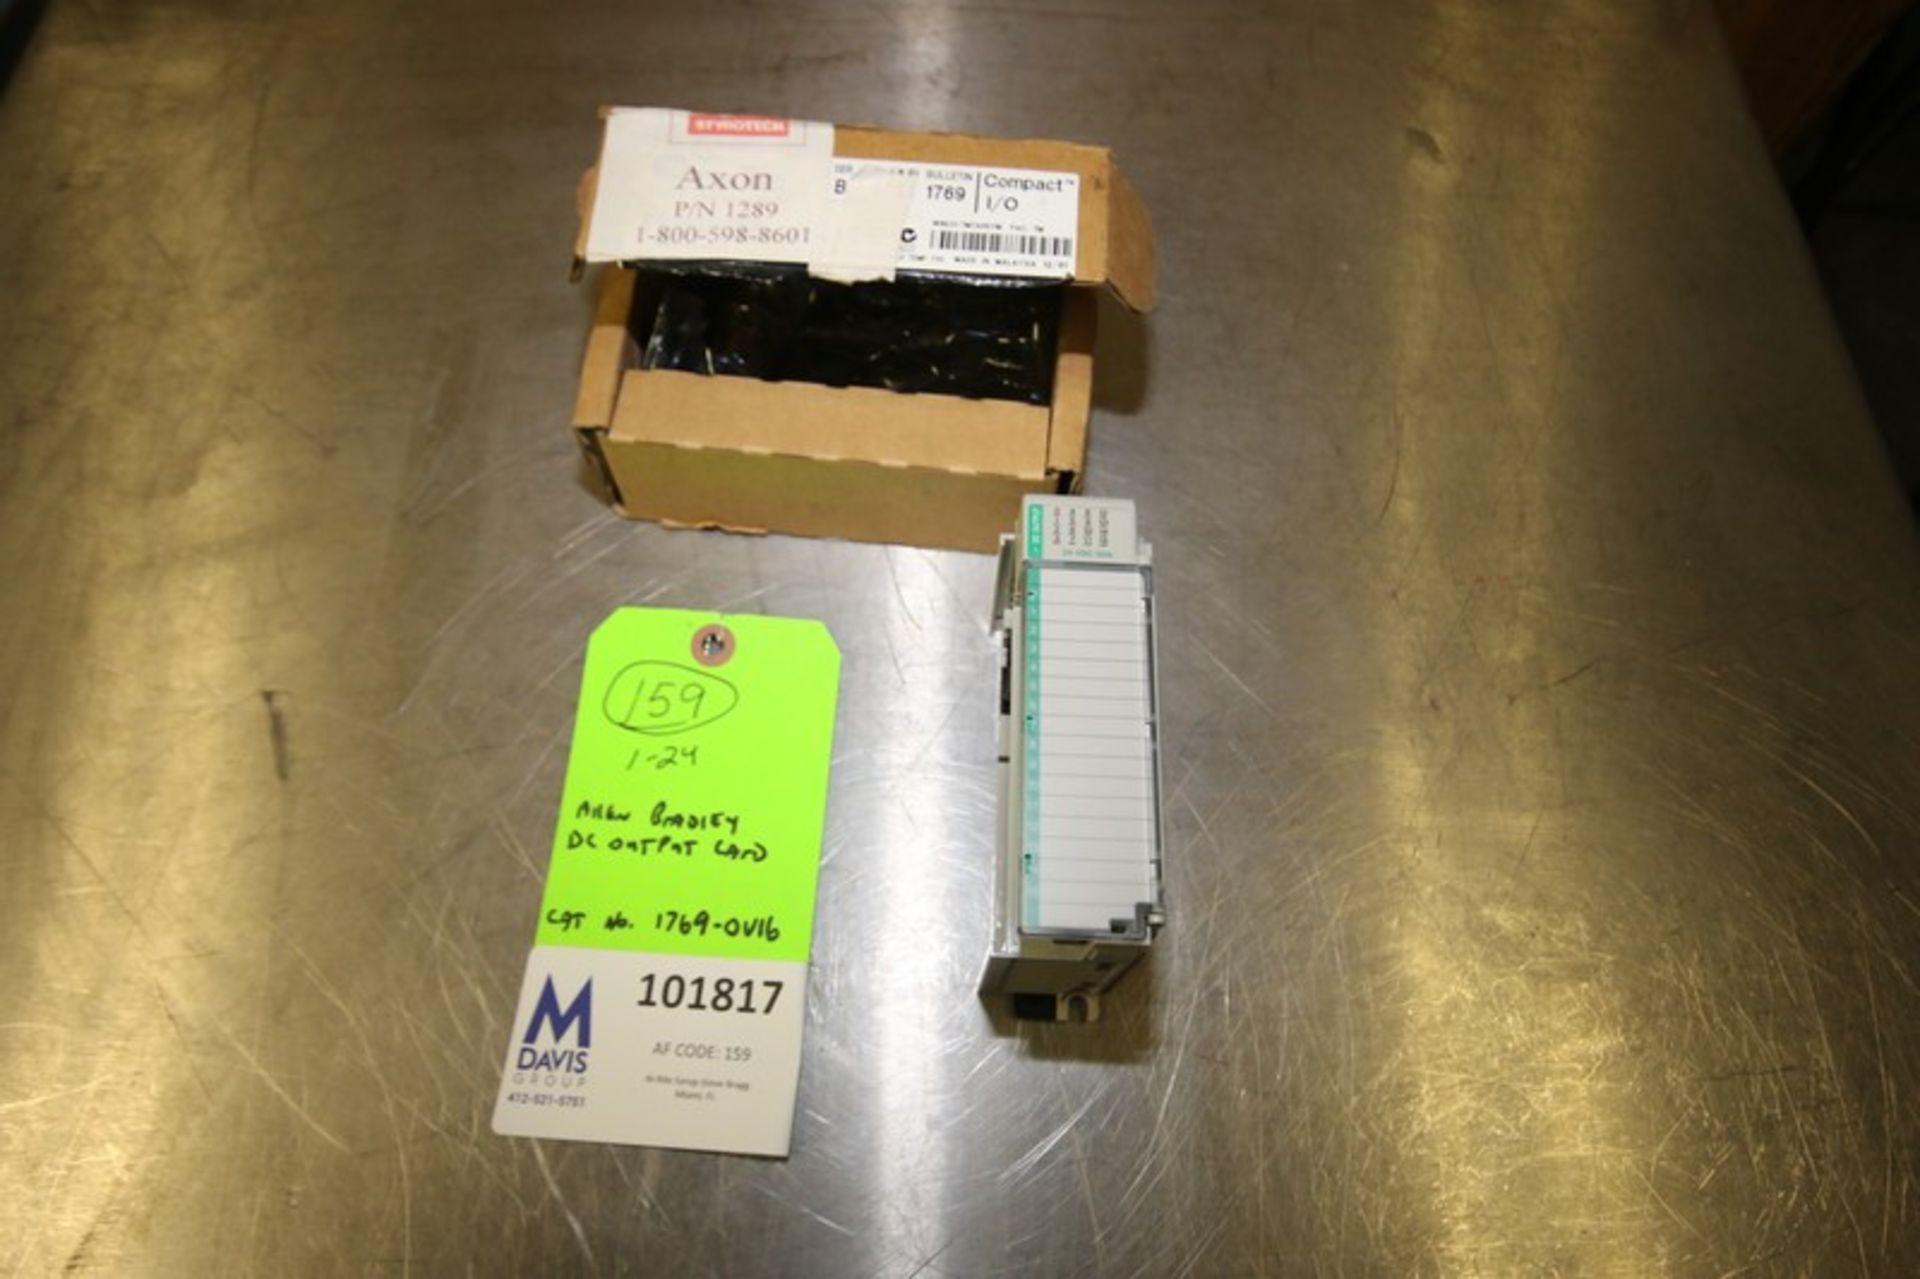 New Allen Bradley DC Output Card for Compact I/O PLC, Cat. No. 1769 Series B (INV#101817) (Located @